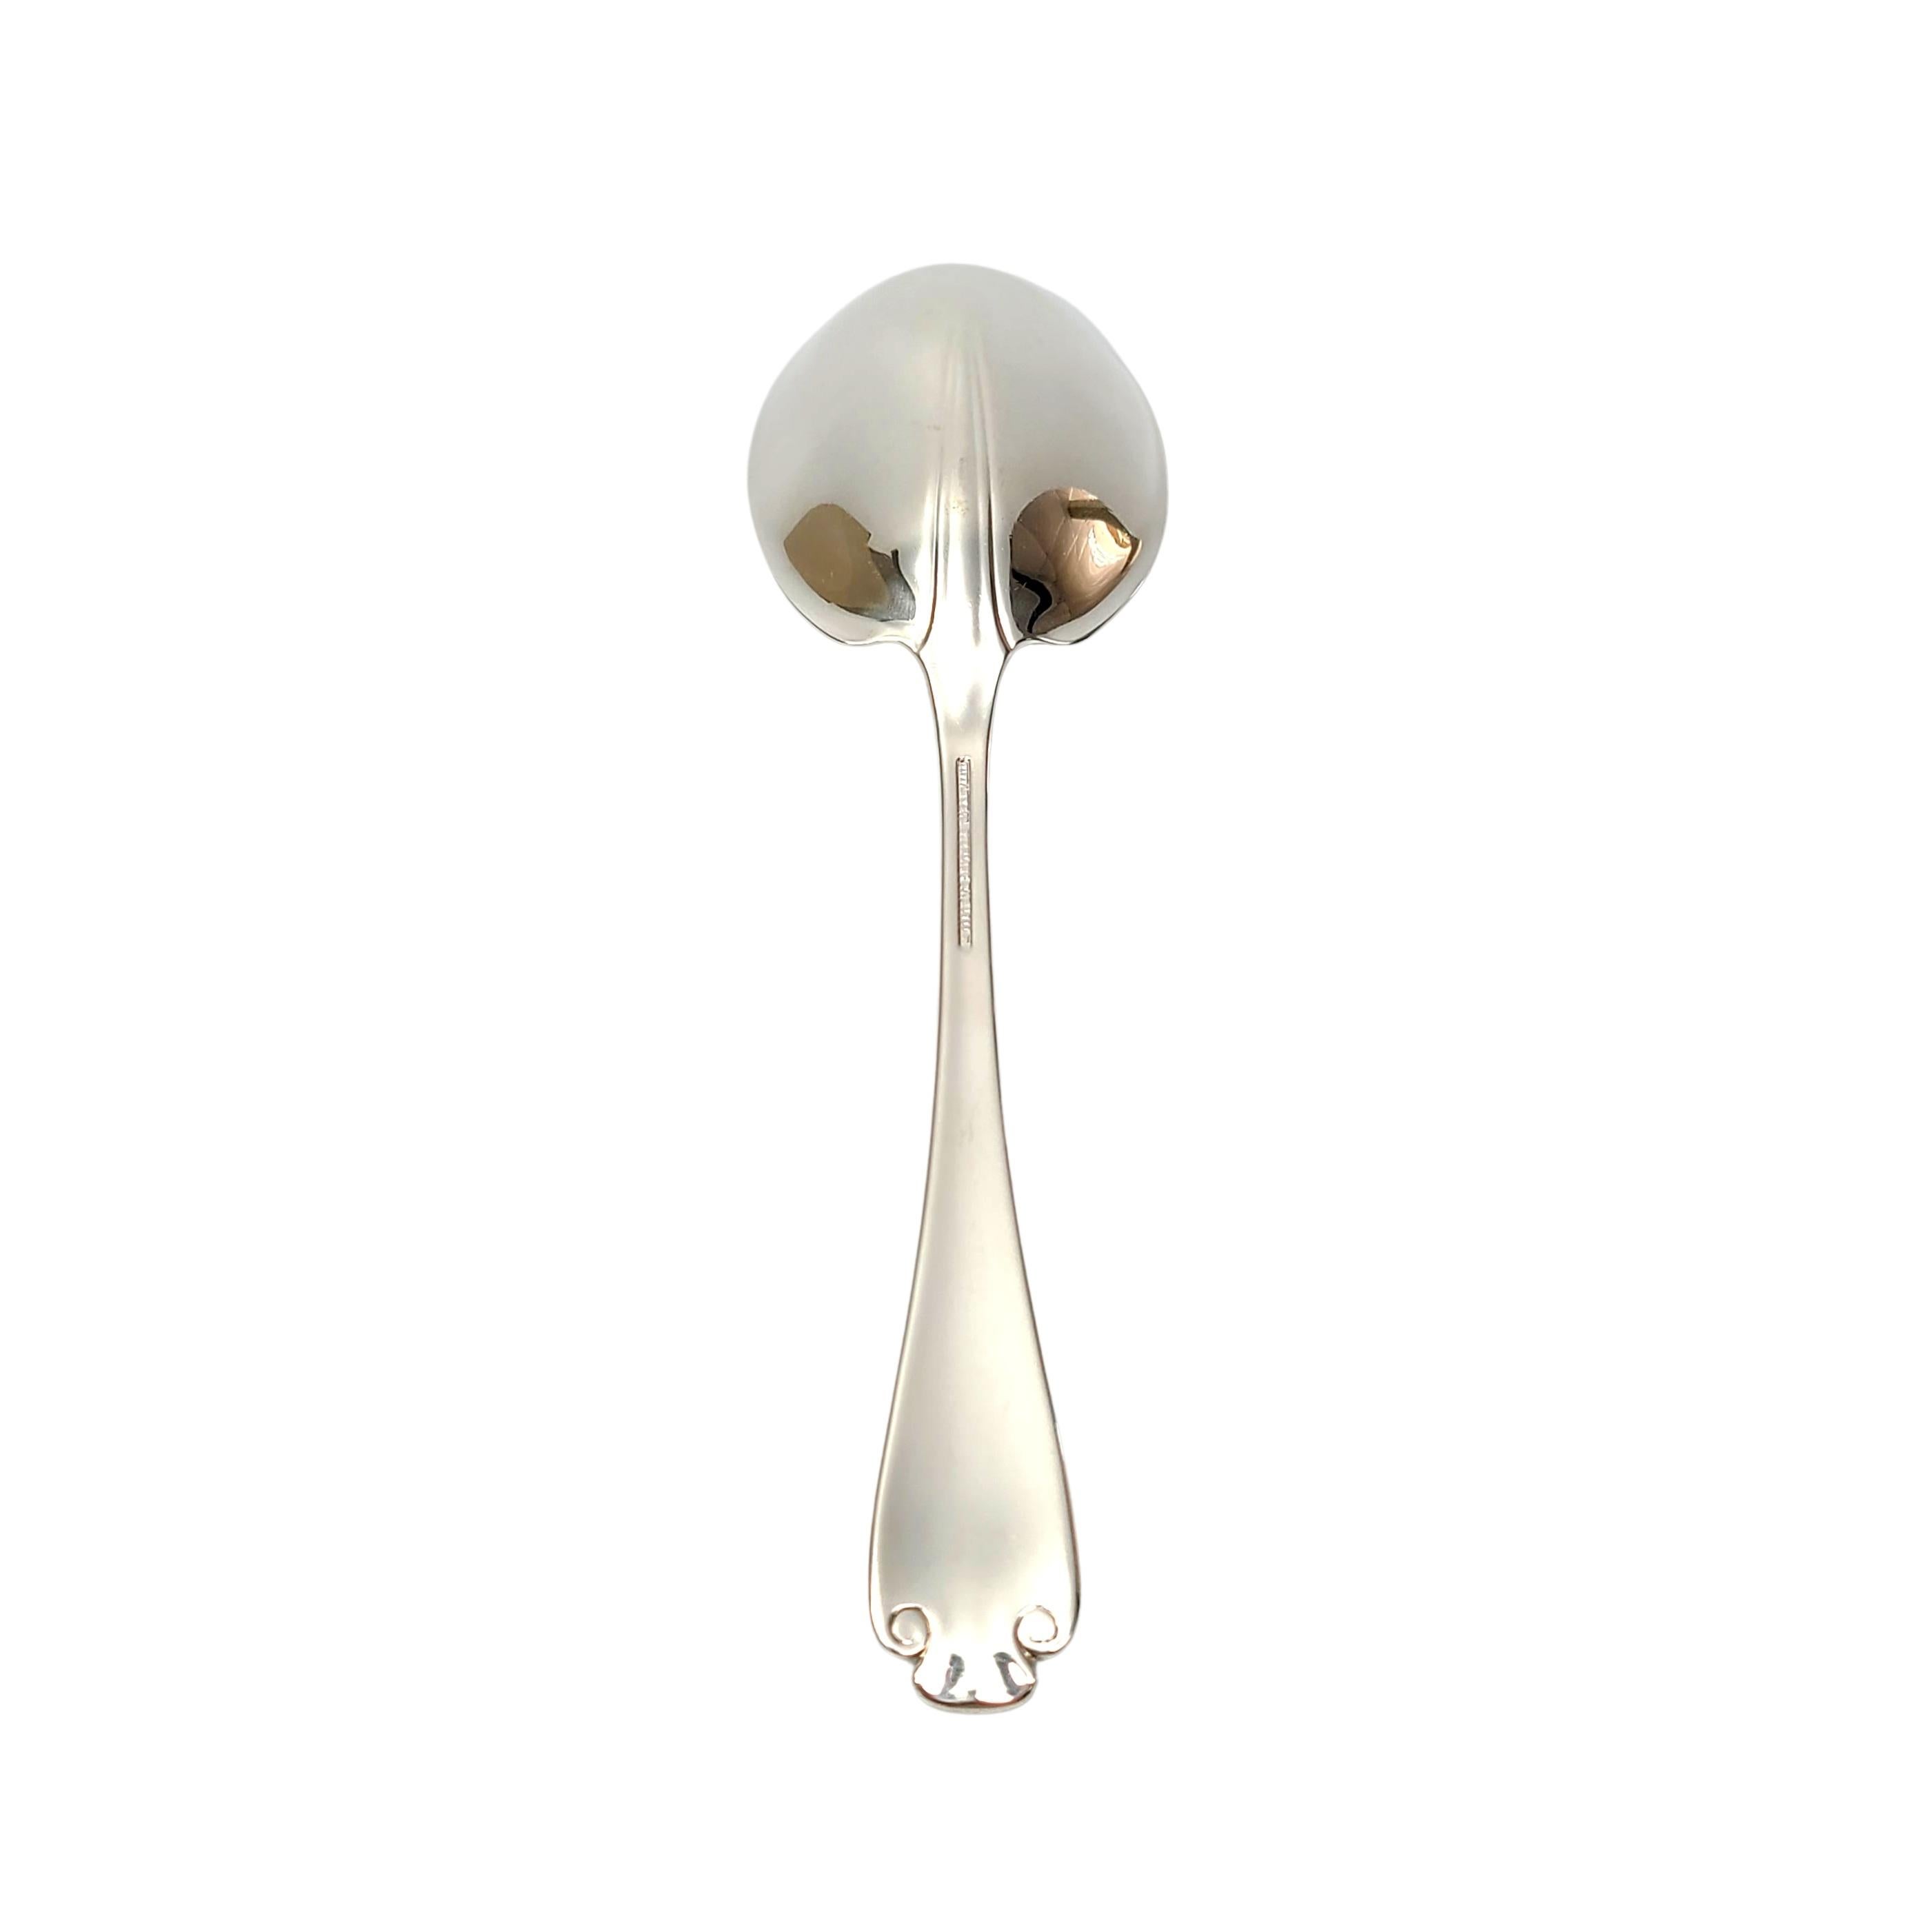 Sterling silver berry or casserole spoon by Tiffany & Co in the Flemish pattern.

Monogram appears to be EWM

Beautiful heavy serving spoon in the Flemish pattern, featuring a simple and elegant scroll design, making it a timeless classic that is